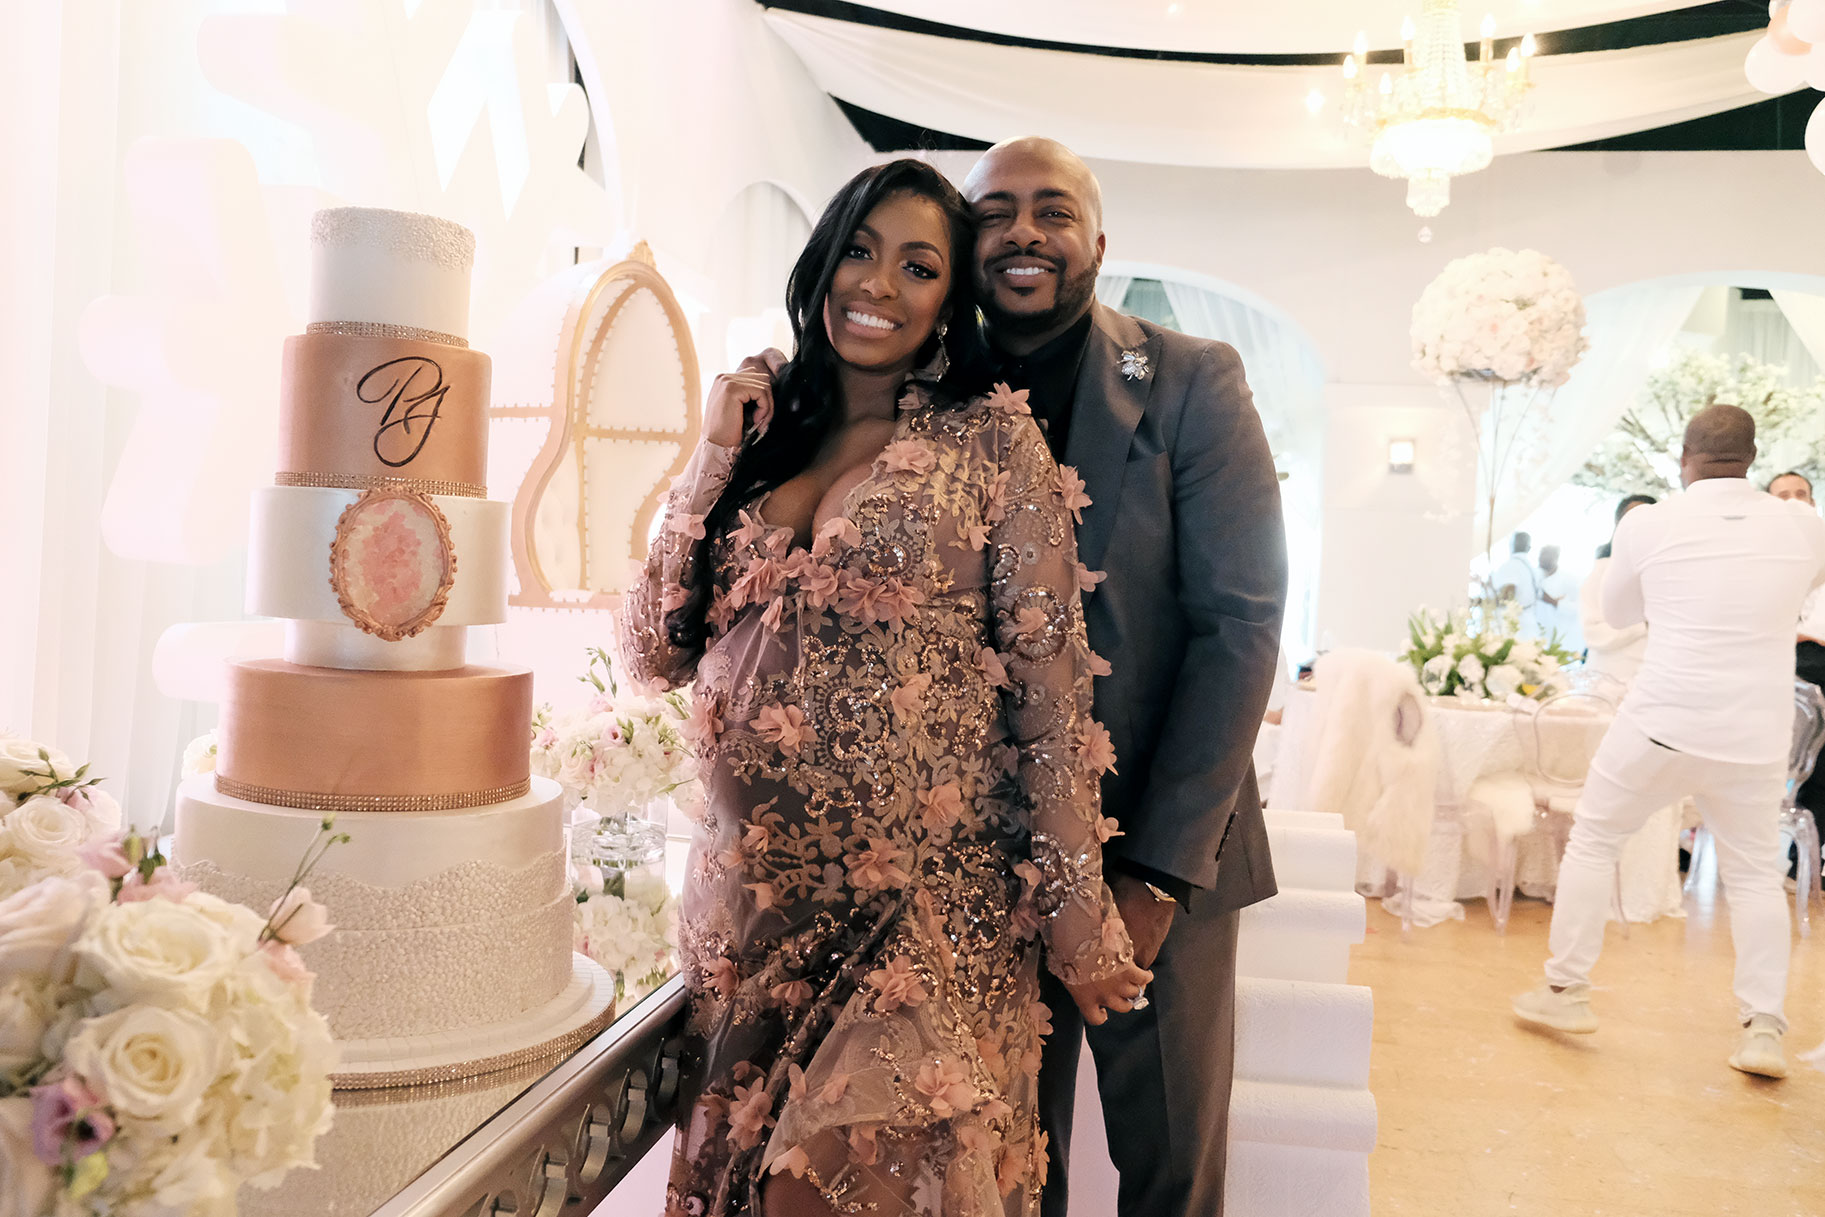 Porsha Williams and Dennis McKinley stand together in front of the cake during Porshas baby shower